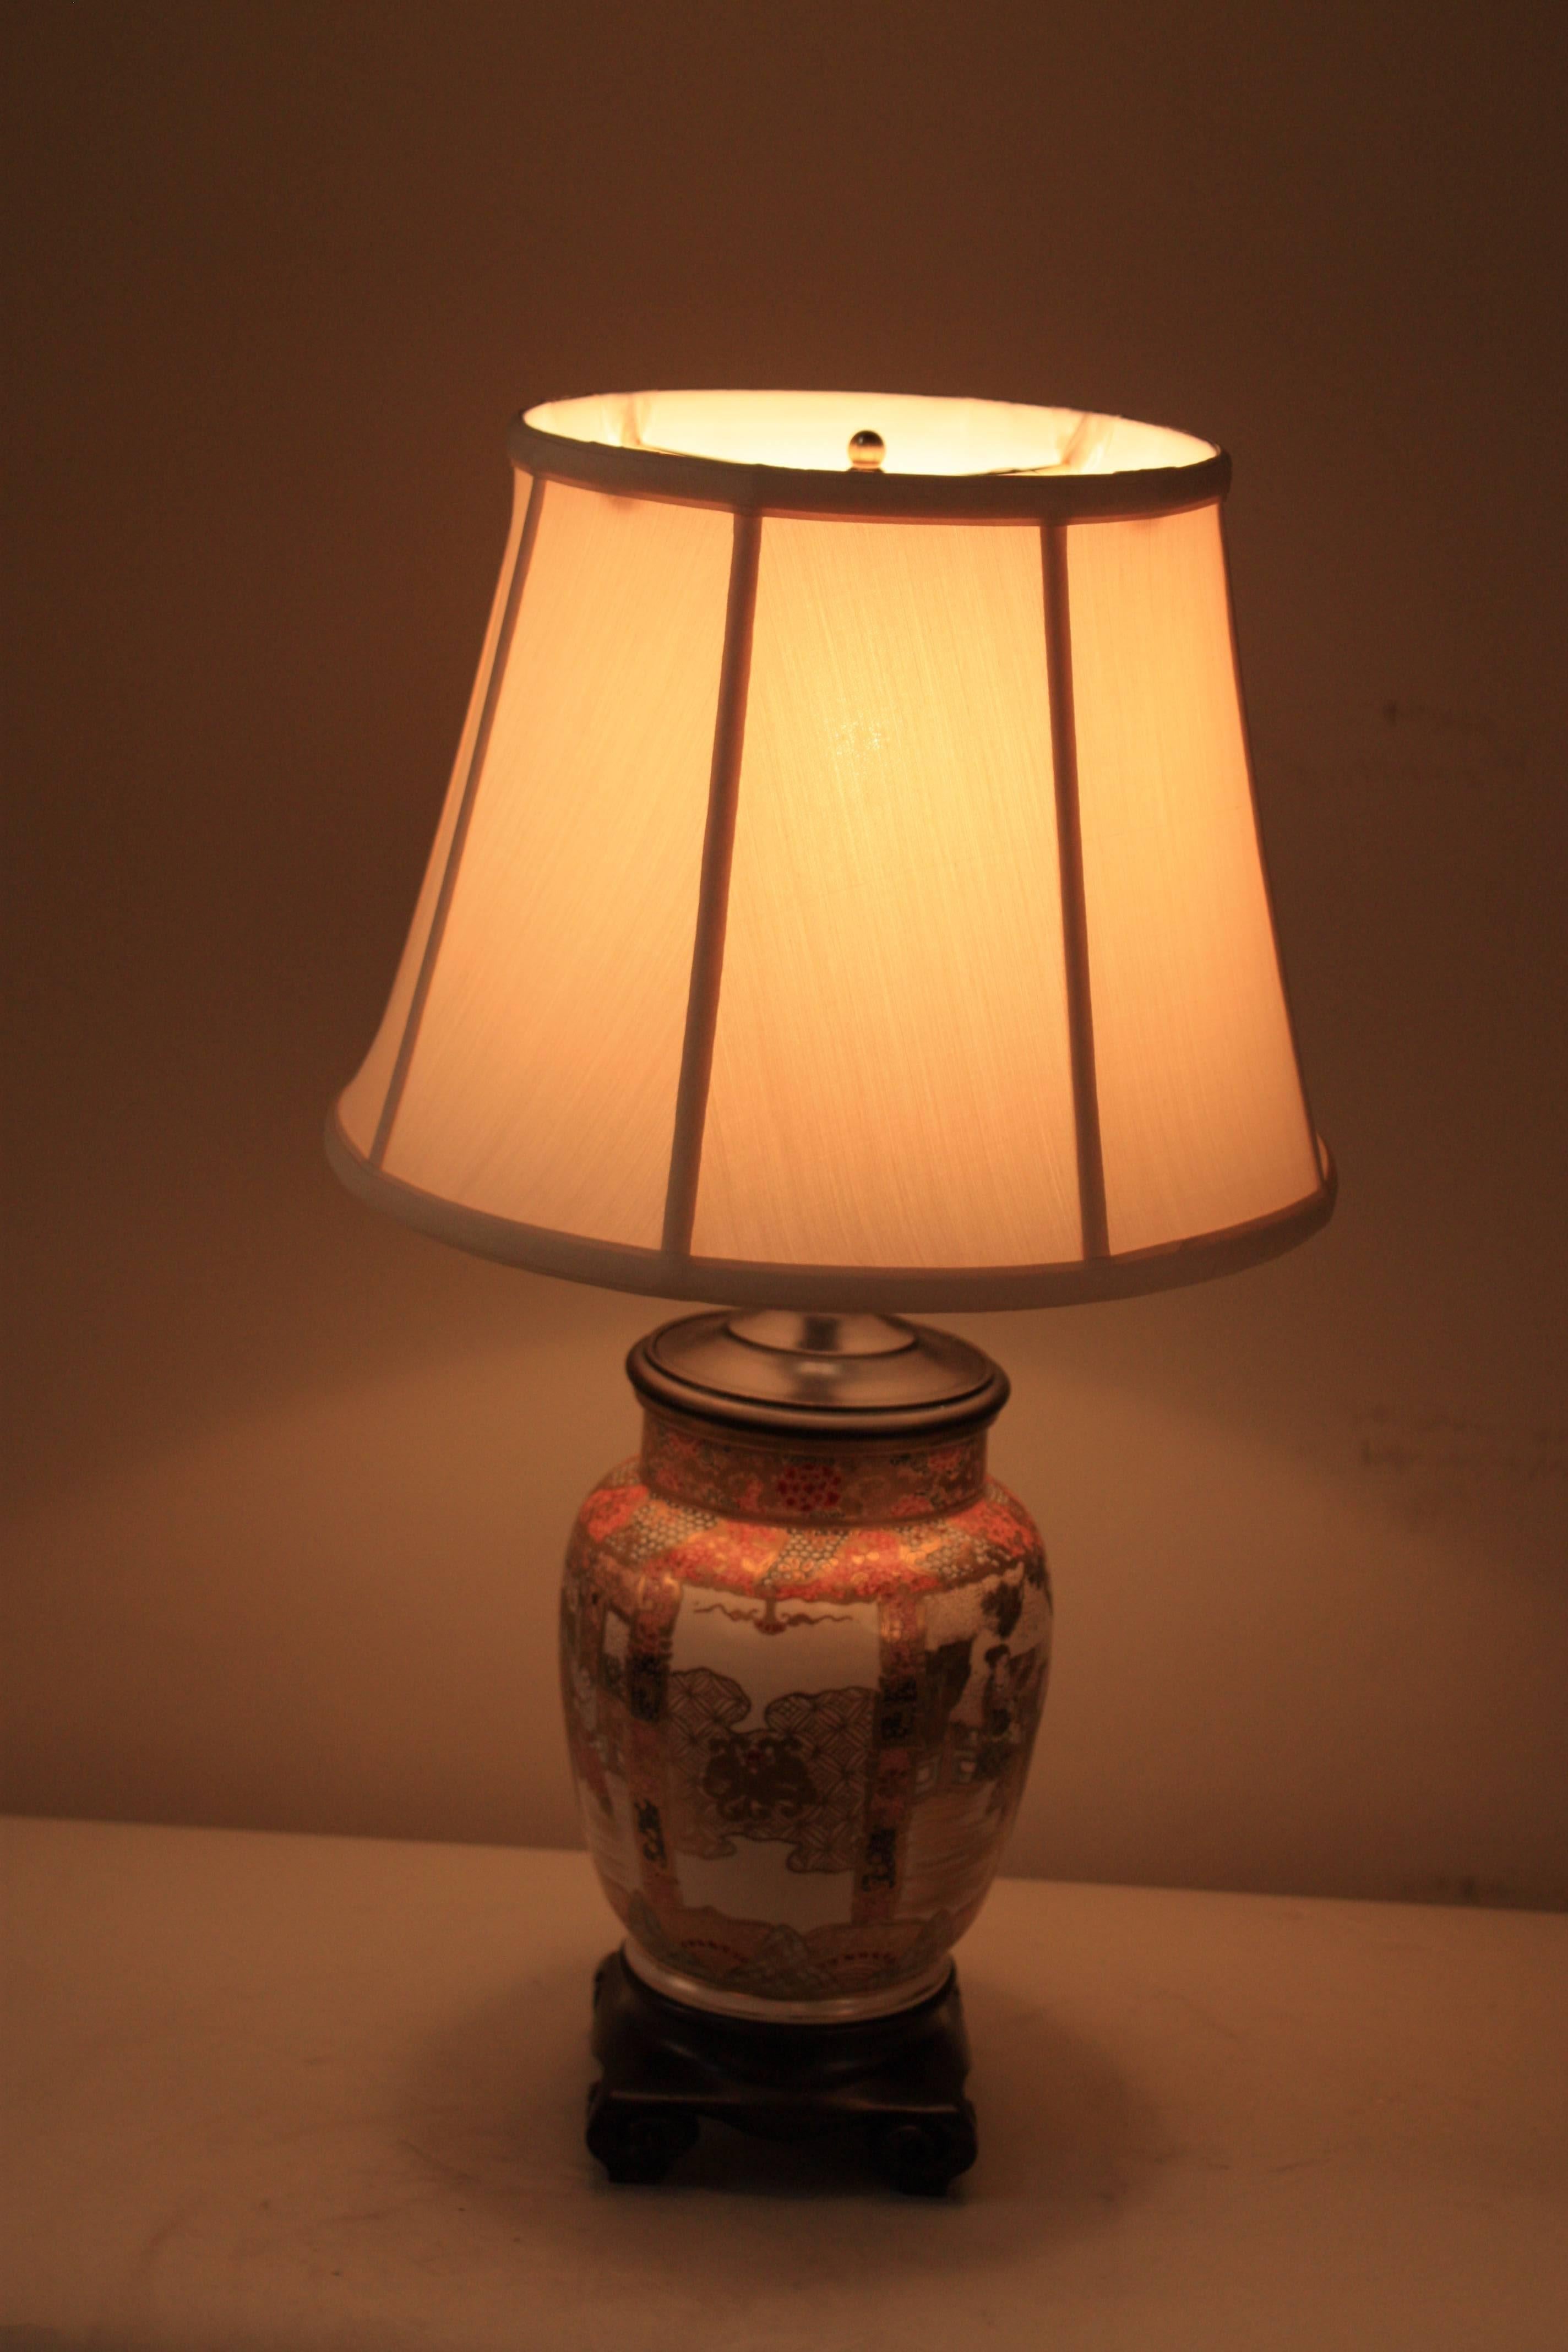 Japanese 19th century import to France and were mounted with bronze for oil lamp and now has been modified, electrified and fitted with silk lampshades.